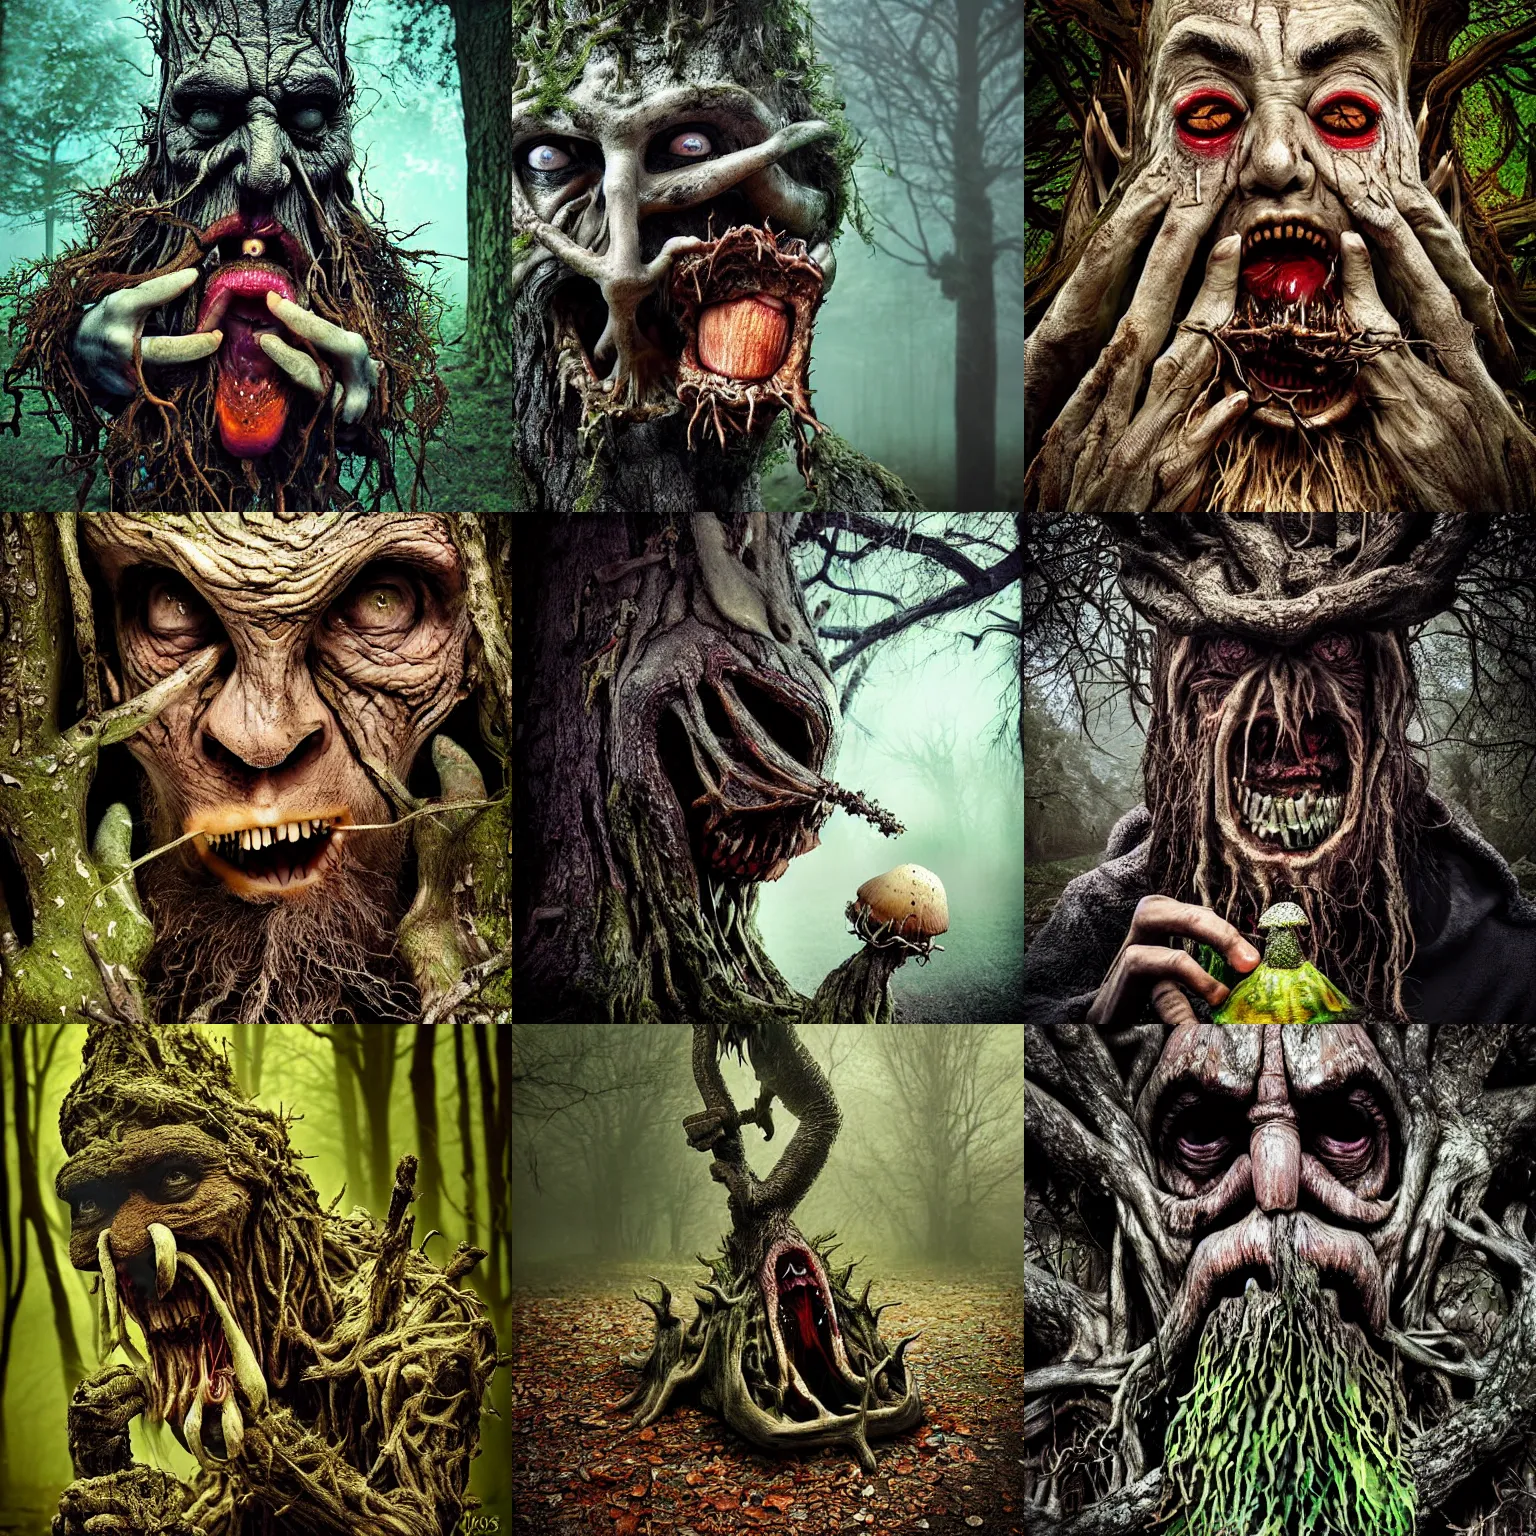 Prompt: creepy scary photograph of angry treebeard oak tree savagely stuffing amanita mushrooms into his gaping maw 🍄, dark fantasy horror, highly detailed, disturbing tortured face made of wood, oak tree ent, fog, eerie mist